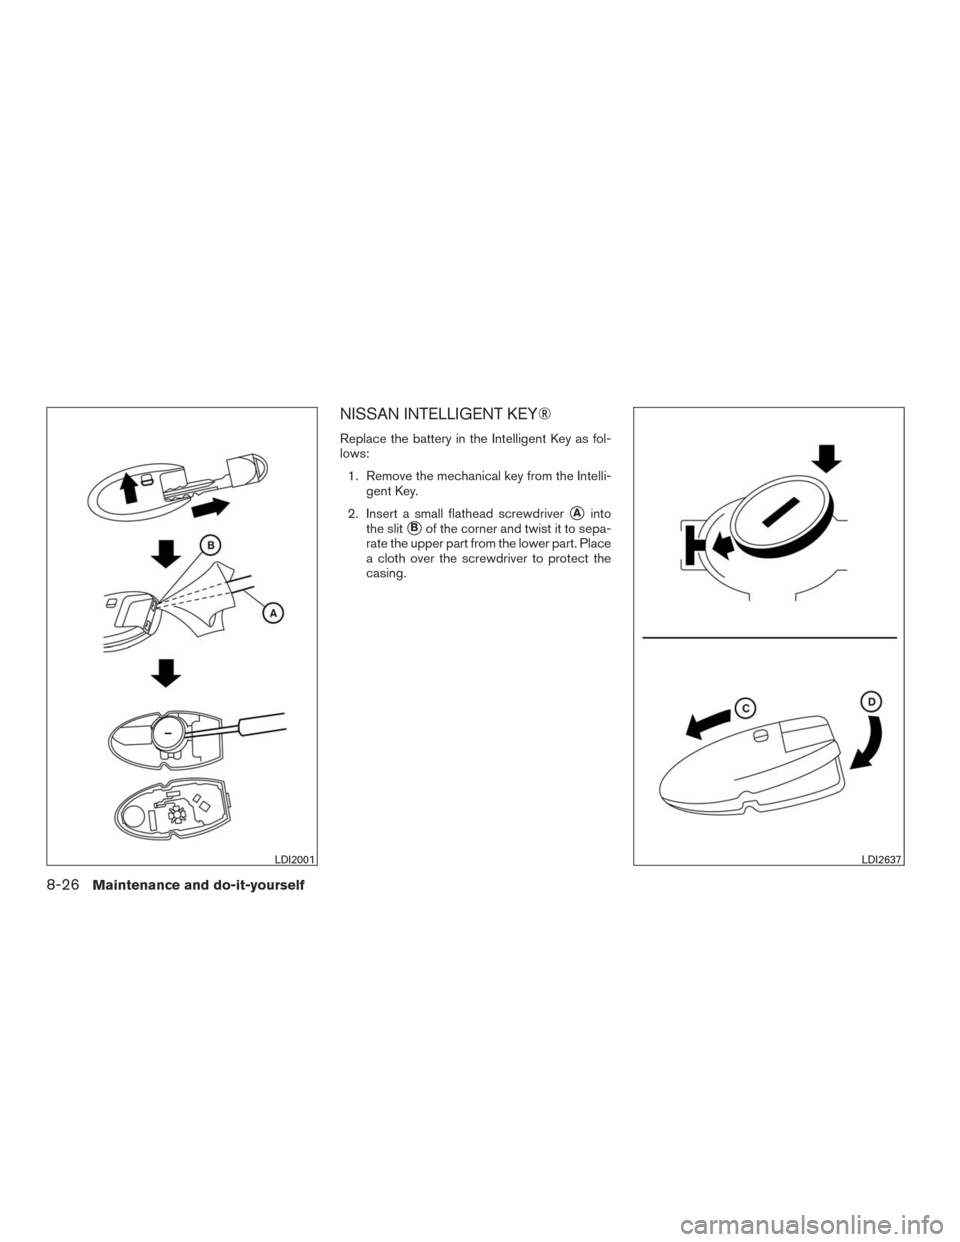 NISSAN MURANO 2016 3.G Workshop Manual NISSAN INTELLIGENT KEY®
Replace the battery in the Intelligent Key as fol-
lows:
1. Remove the mechanical key from the Intelli-
gent Key.
2. Insert a small flathead screwdriver
Ainto
the slit
Bof t